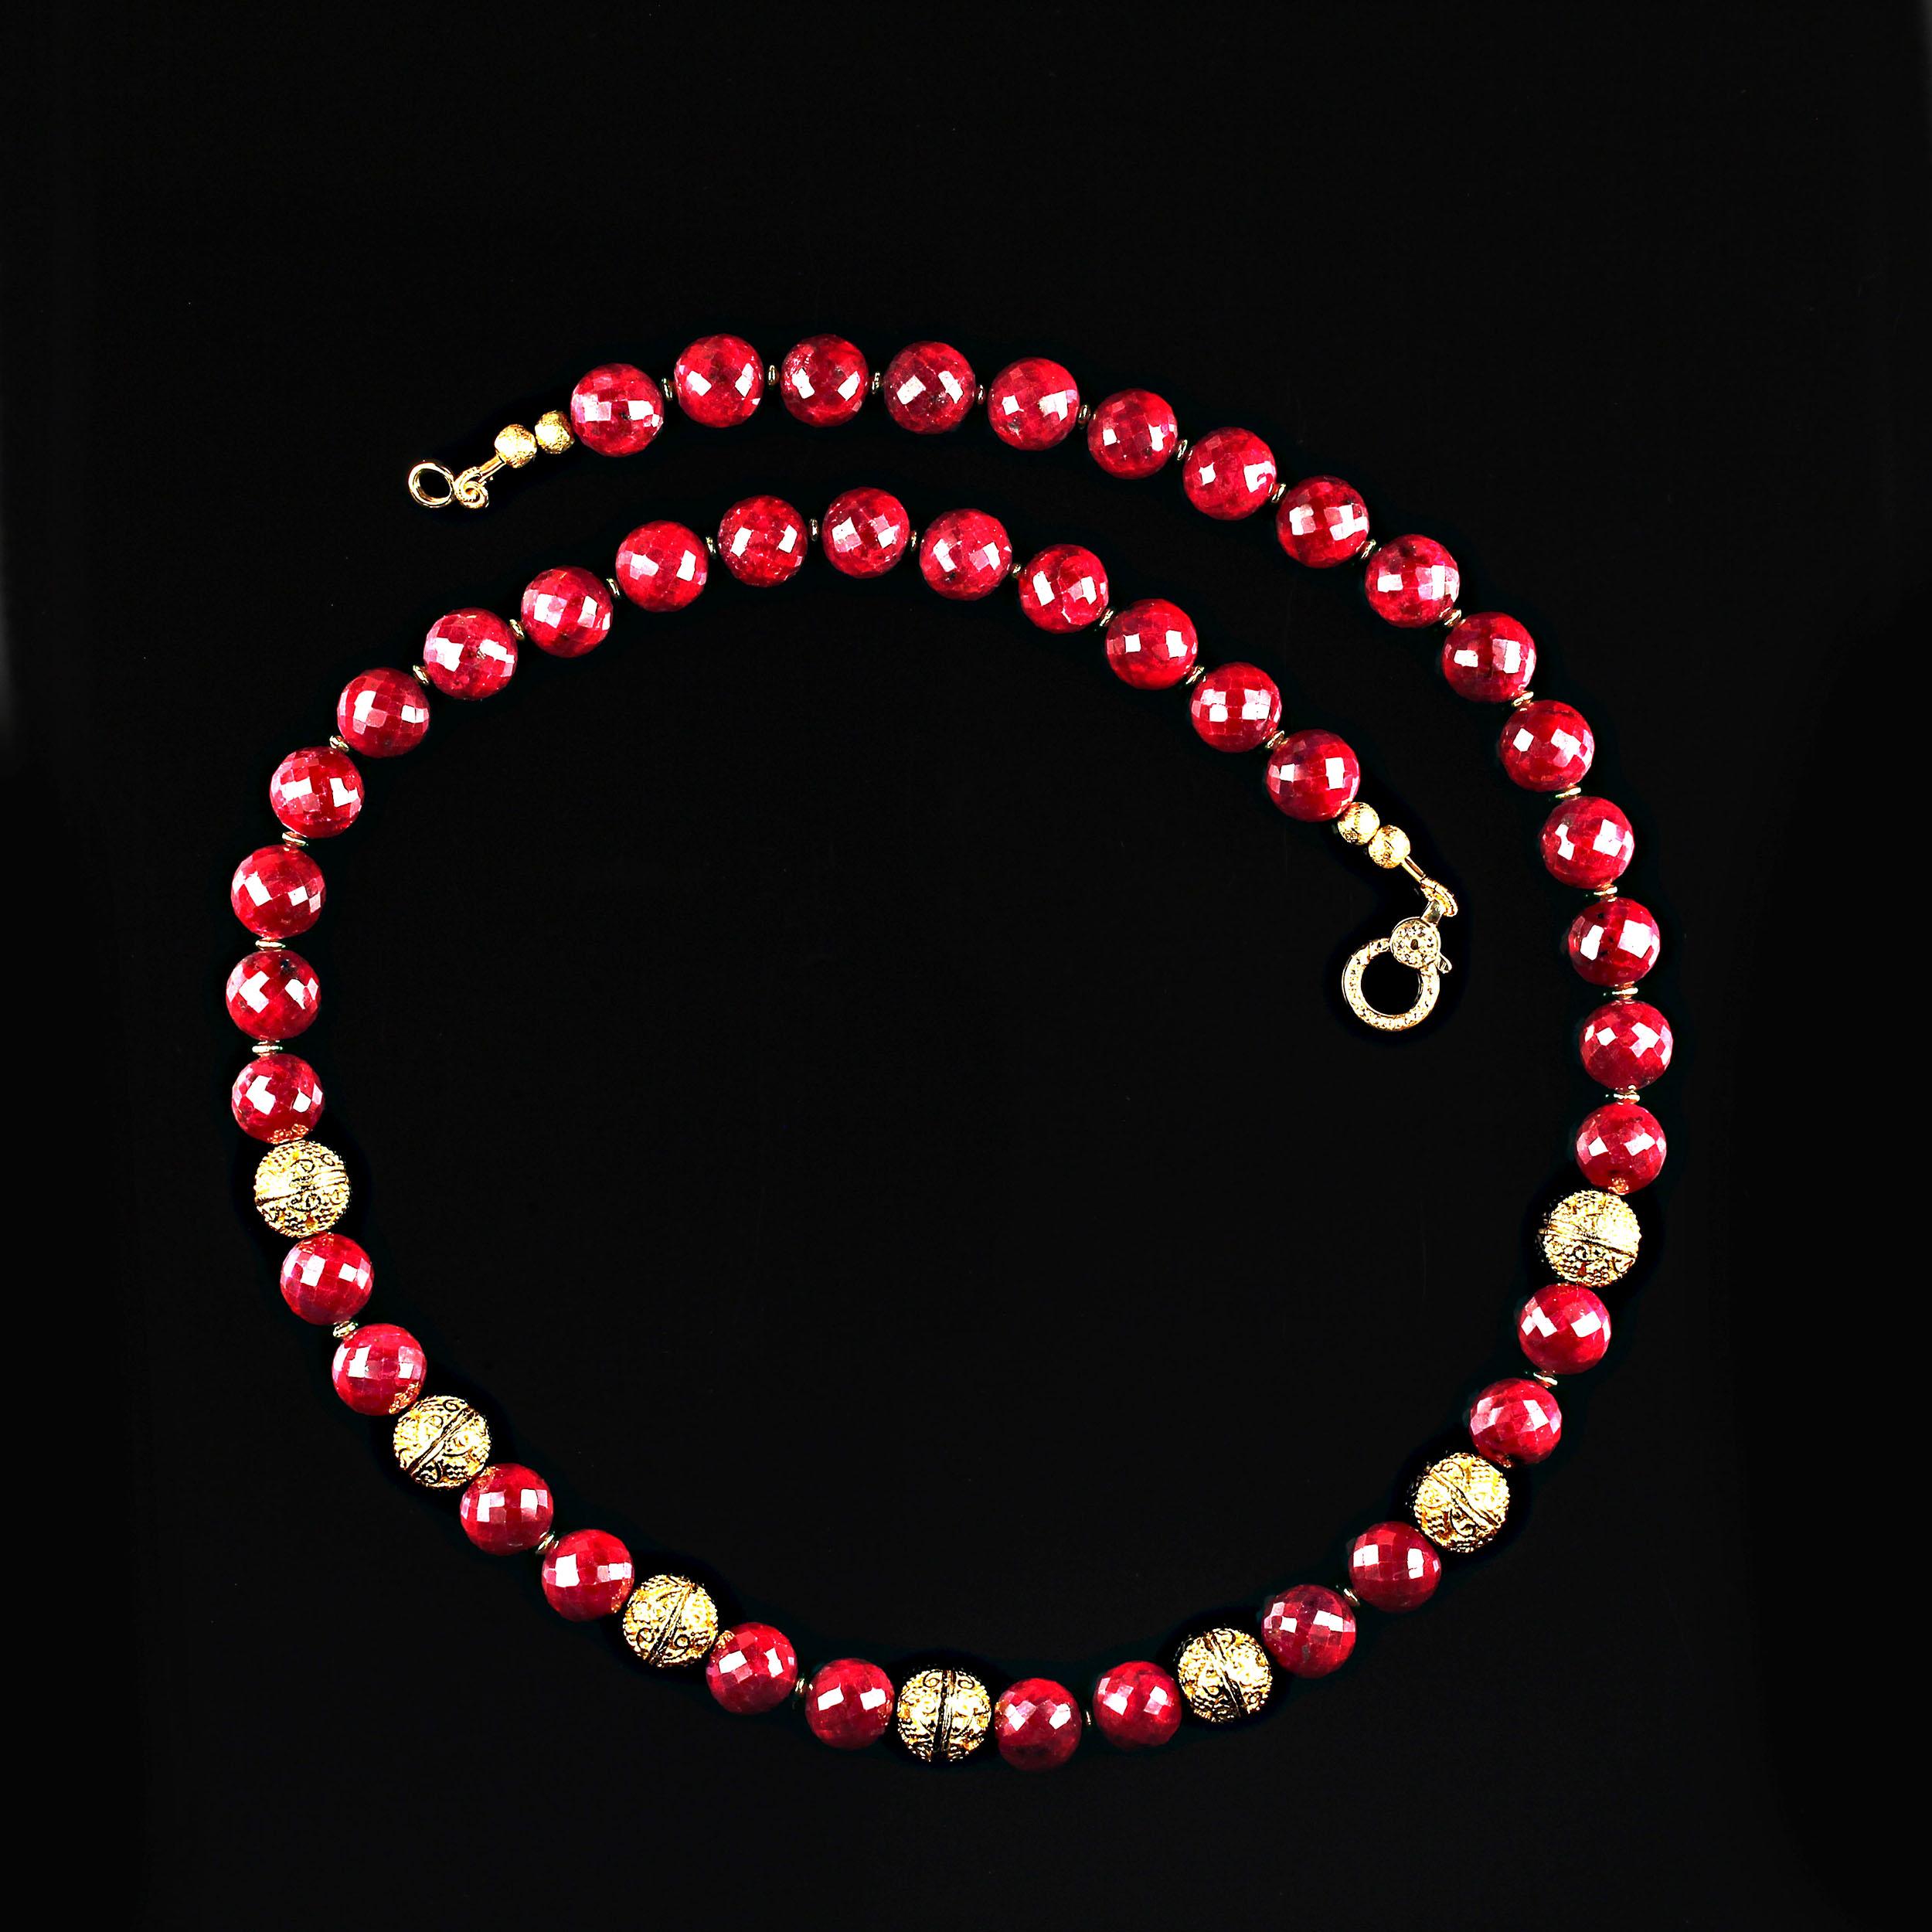 Artisan AJD Elegant faceted Ruby beaded necklace with goldy accents 21 Inches. For Sale